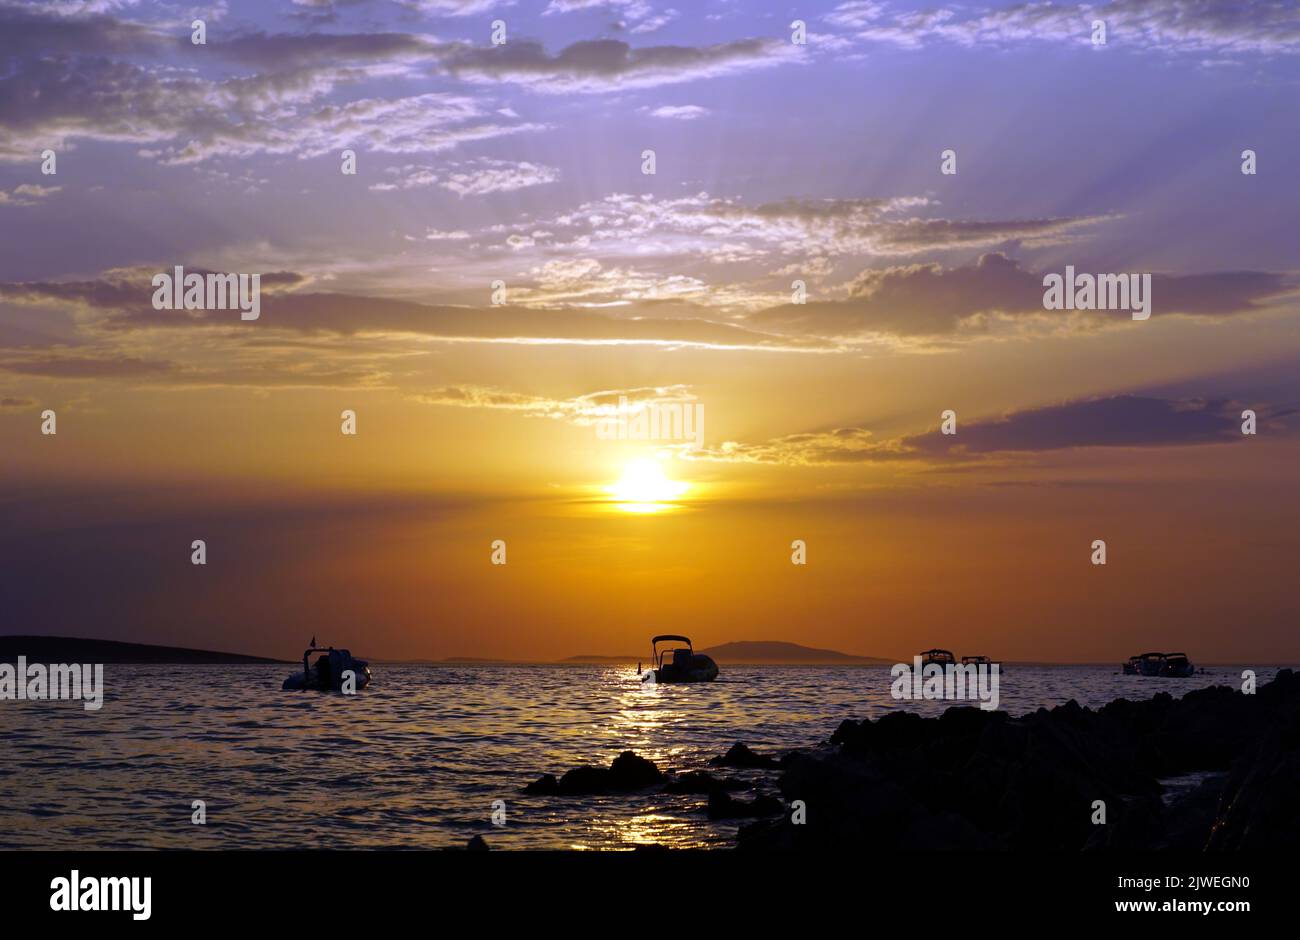 Purplish sky during blue hour at evening in stunning seascape at summertime Stock Photo